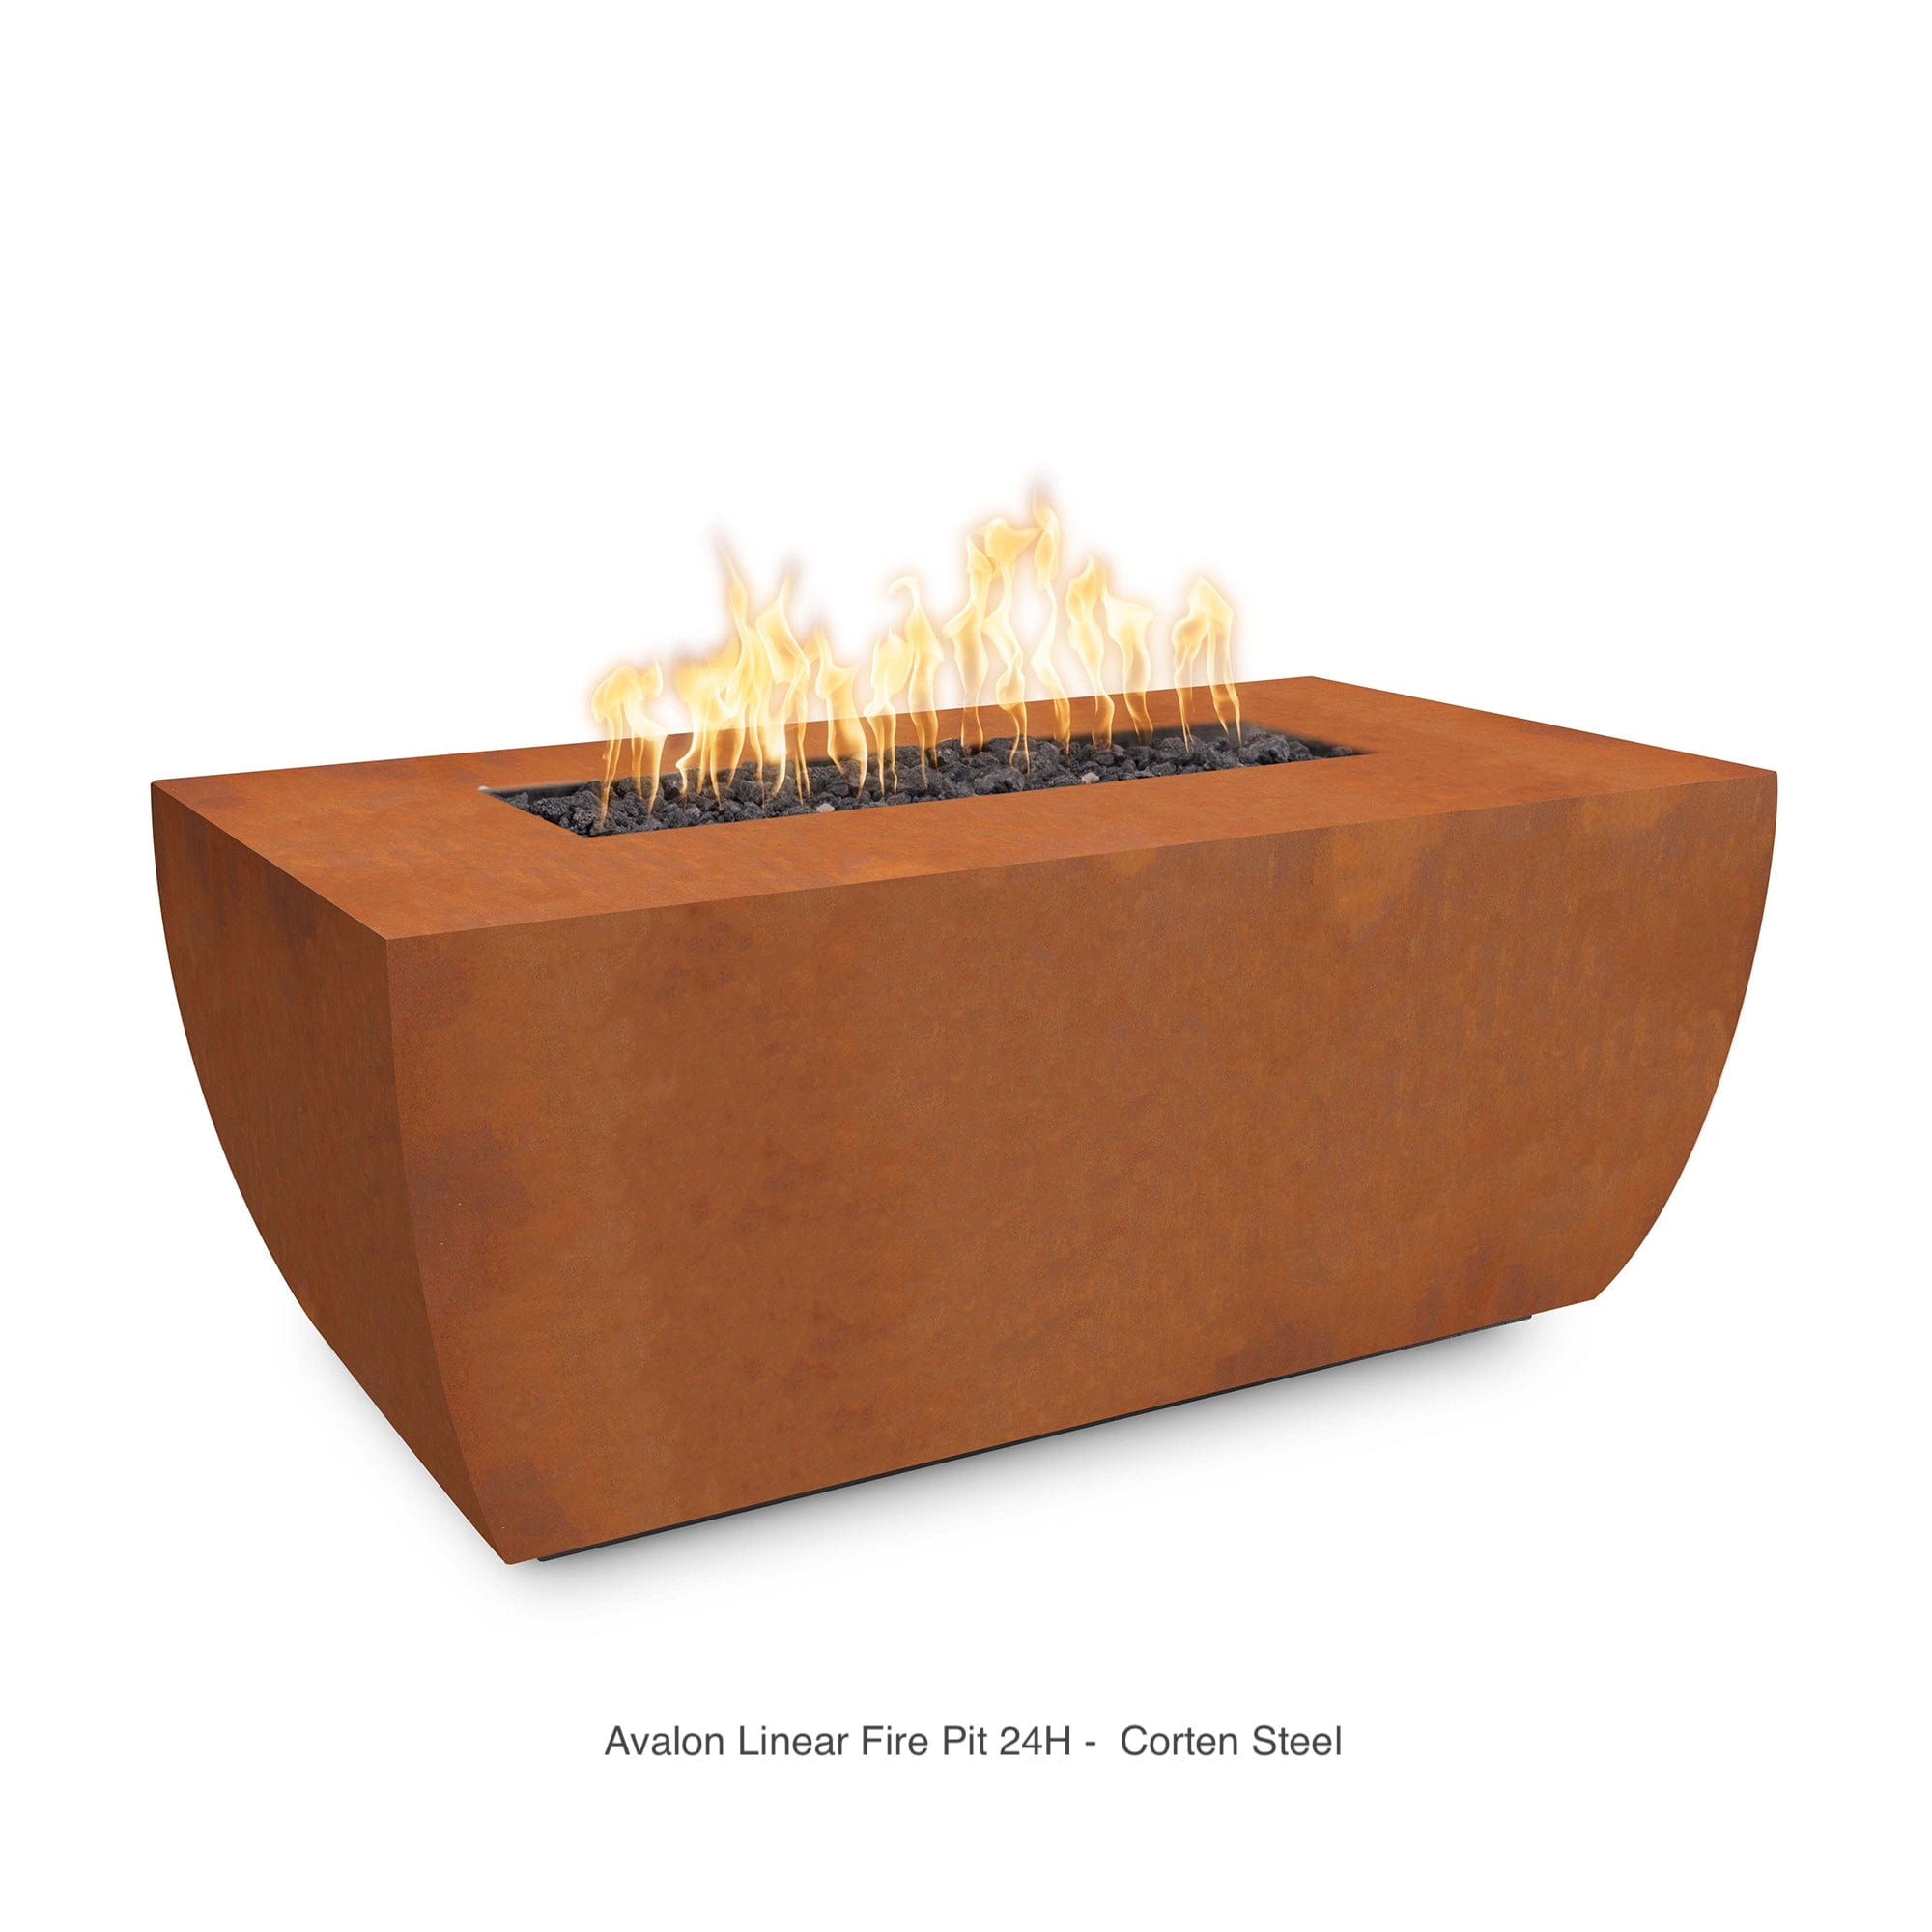 The Outdoor Plus Fire Features The Outdoor Plus 24" Tall 48", 60", 72", 84" Rectangular Avalon Corten Steel Fire Pit / OPT-AVLCSxx24, OPT-AVLCSxx24FSML, OPT-AVLCSxx24FSEN, OPT-AVLCSxx24E12V, OPT-AVLCSxx24EKIT